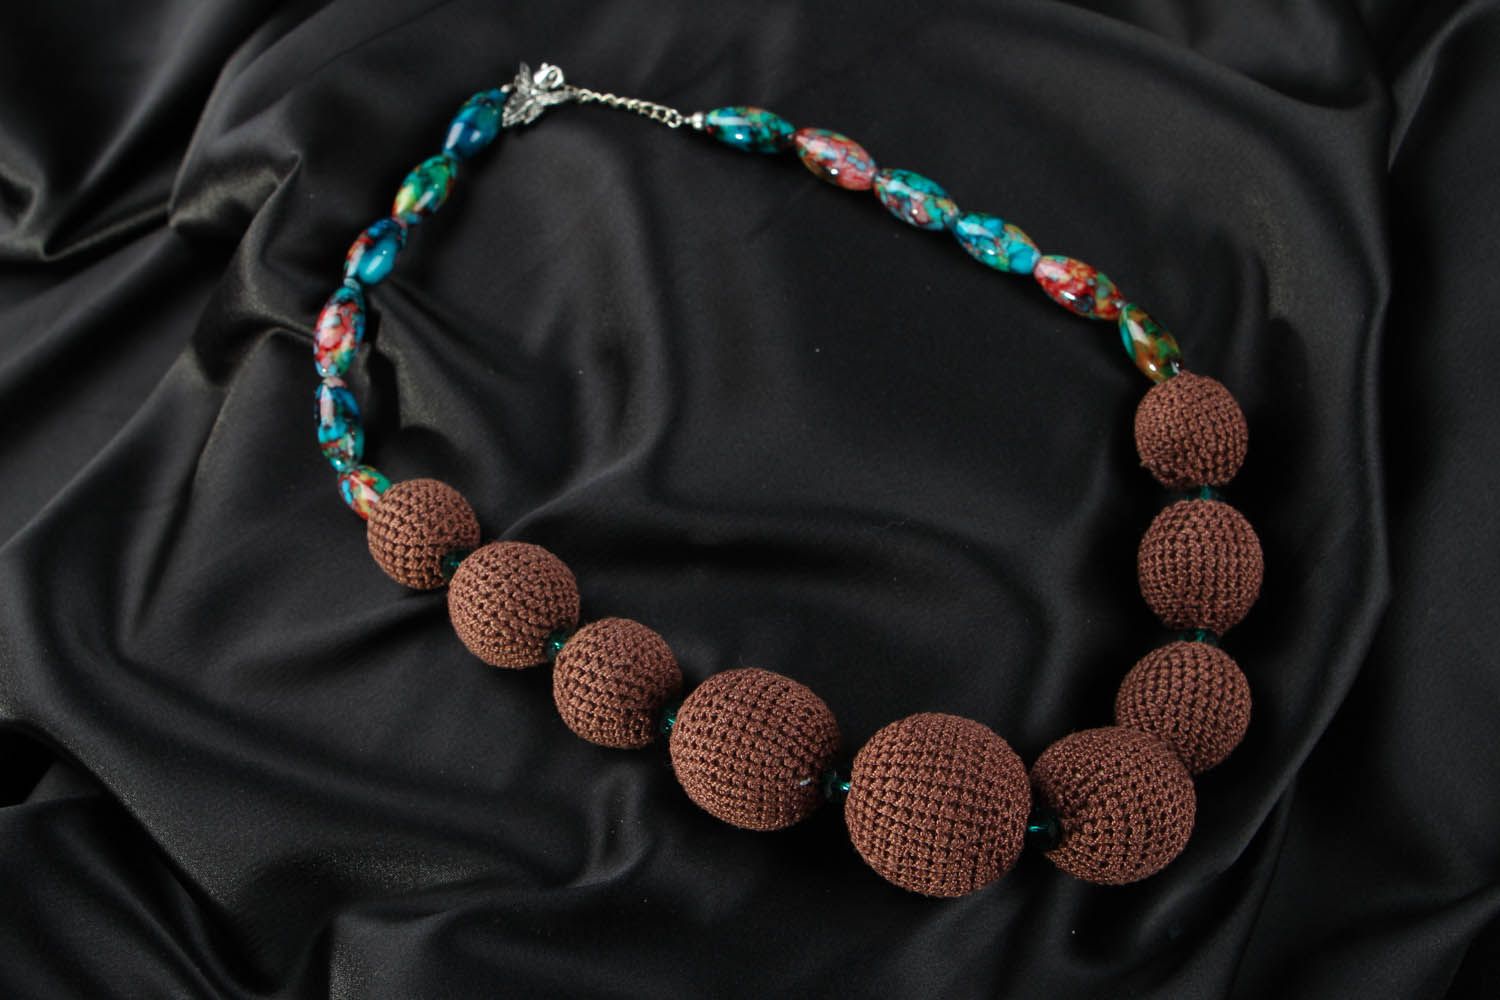 Necklace made of tied beads photo 1